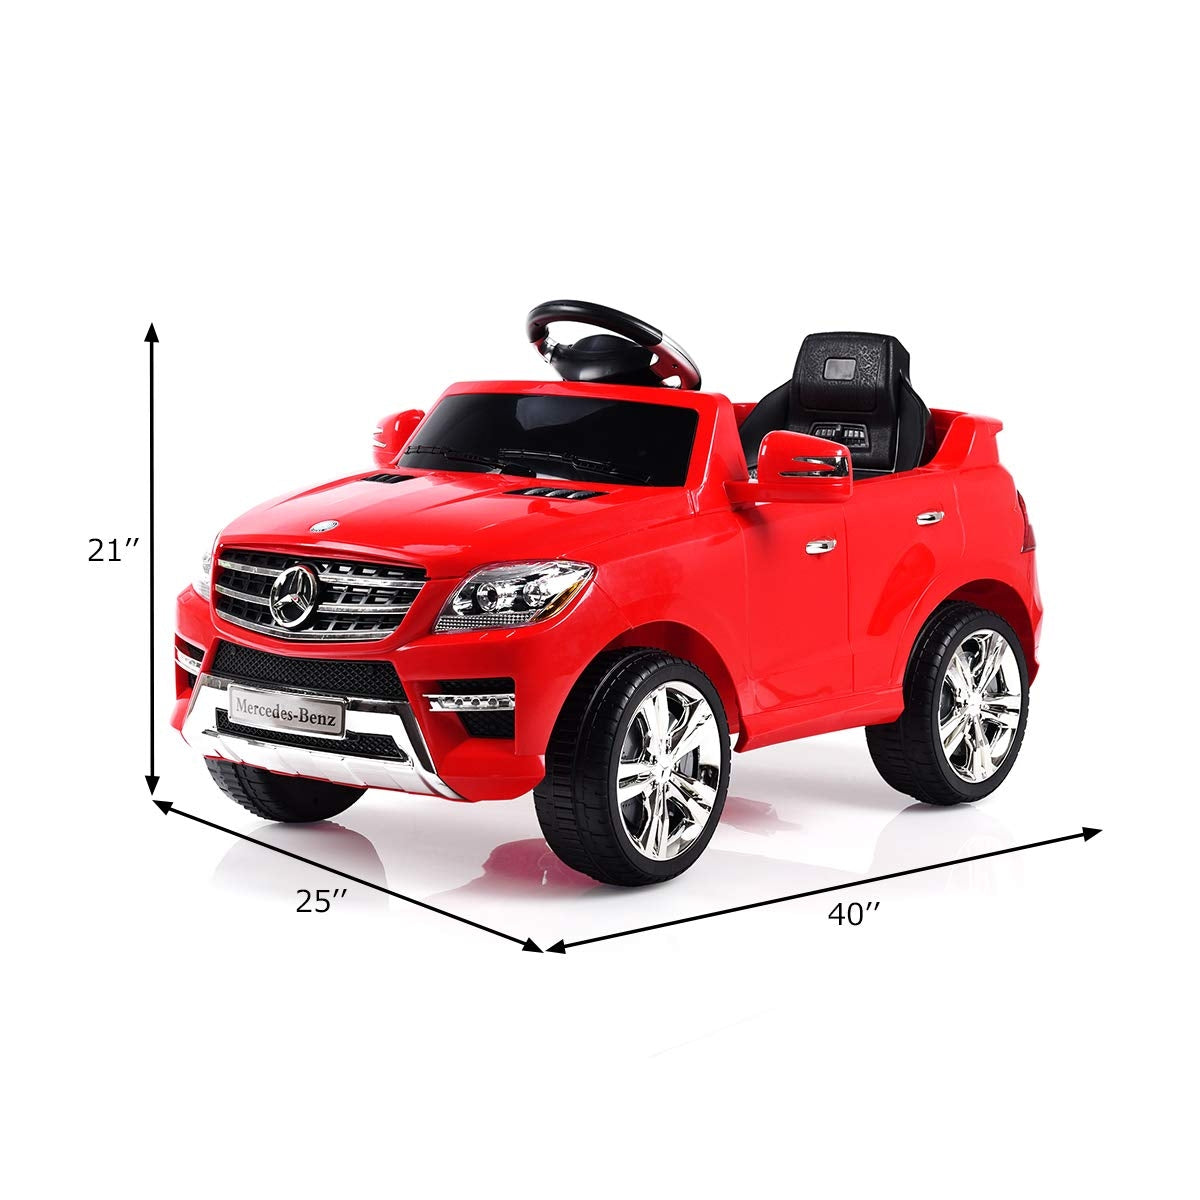 Premium Quality and Size: Constructed from durable plastic material, the car ensures a smooth and enjoyable ride. Its product dimensions are 25" x 40" x 21" (L x W x H), and it can accommodate children weighing up to 44 lbs. The car's speed ranges from 2.4 to 3.1 km/h, making it suitable for children aged 3 to 6 years.